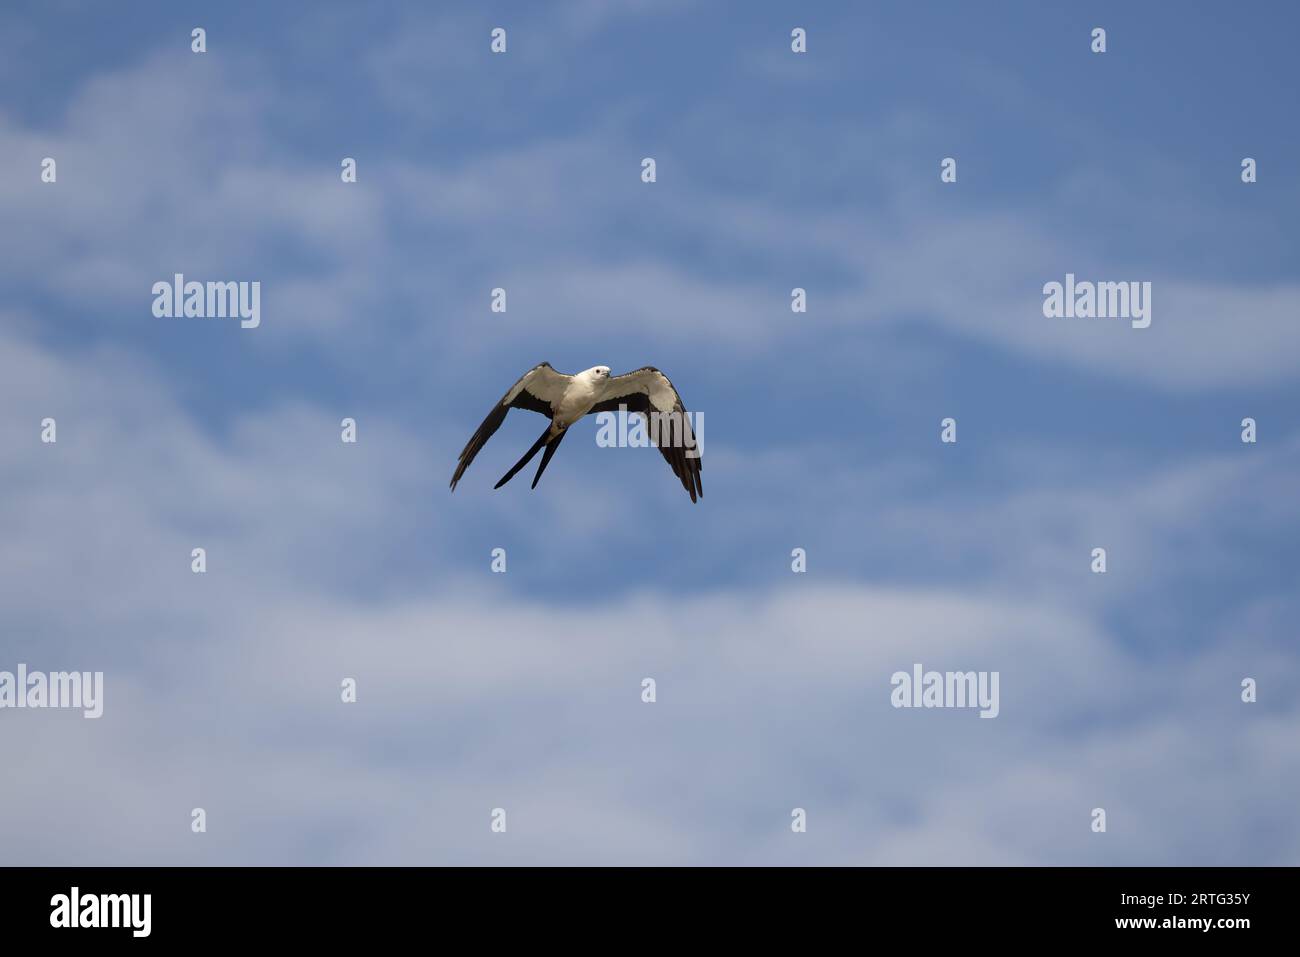 A swallow-tailed kite in flight. Stock Photo